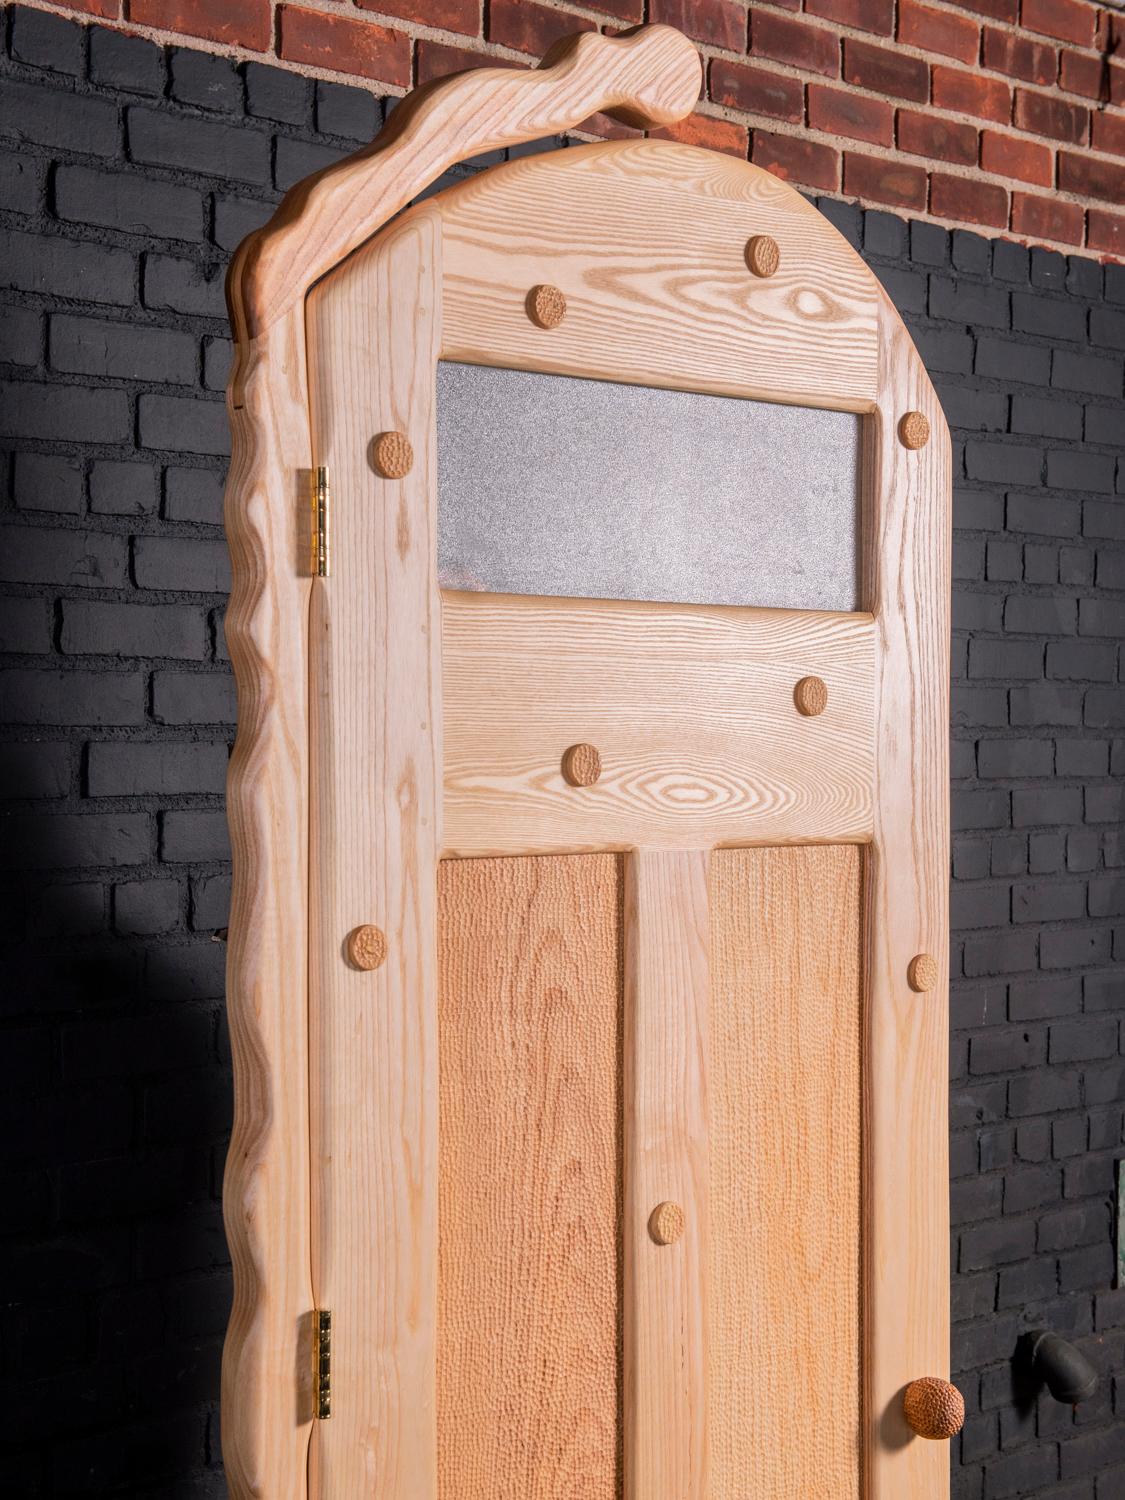 Hockey door by Luke Malaney
Dimensions: custom made
Materials: Ash
Natural oil/wax finish

Luke Malaney designs and creates one of a kind pieces of furniture that are made to last. Using old world joinery, elegant design, and some funk, his